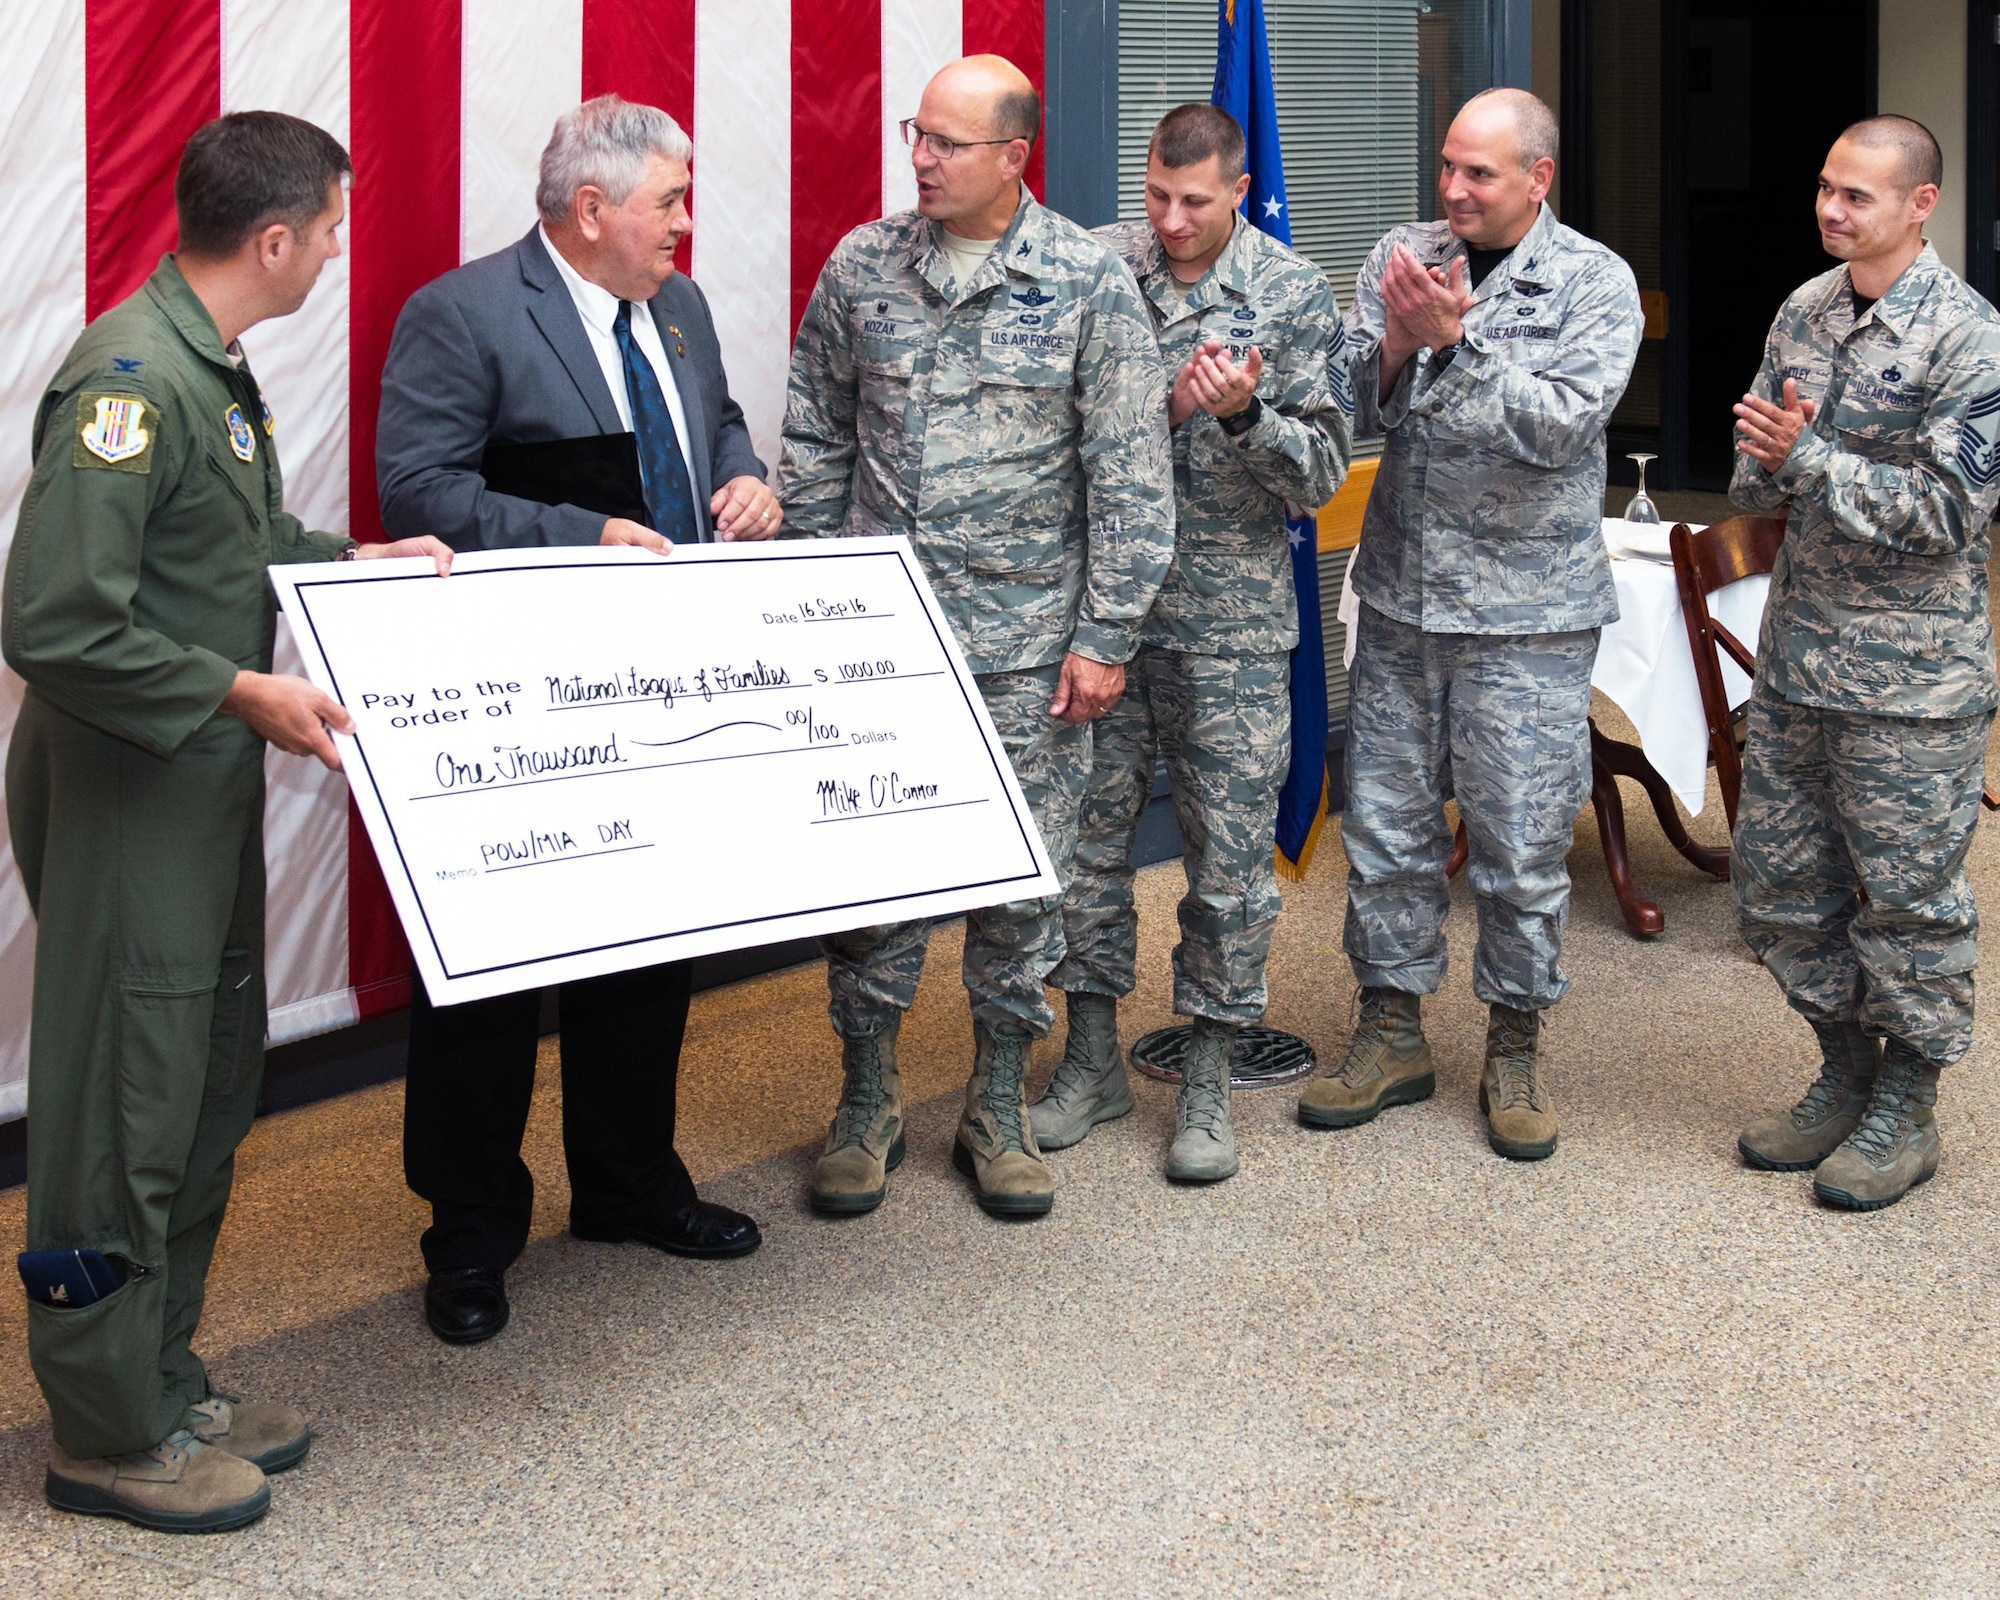 Former Prisoner of War Mike O’Connor is presented a check to the National League of Families on behalf of the Travis Air Force Base, Calif., leadership during the POW/MIA luncheon, Sept. 16, 2016.  O’Connor was held captive for more than five years after his aircraft crashed in South Vietnam in 1968, he was released in 1973 under the Paris Peace Accords. (U.S. Air Force photo by Louis Briscese)